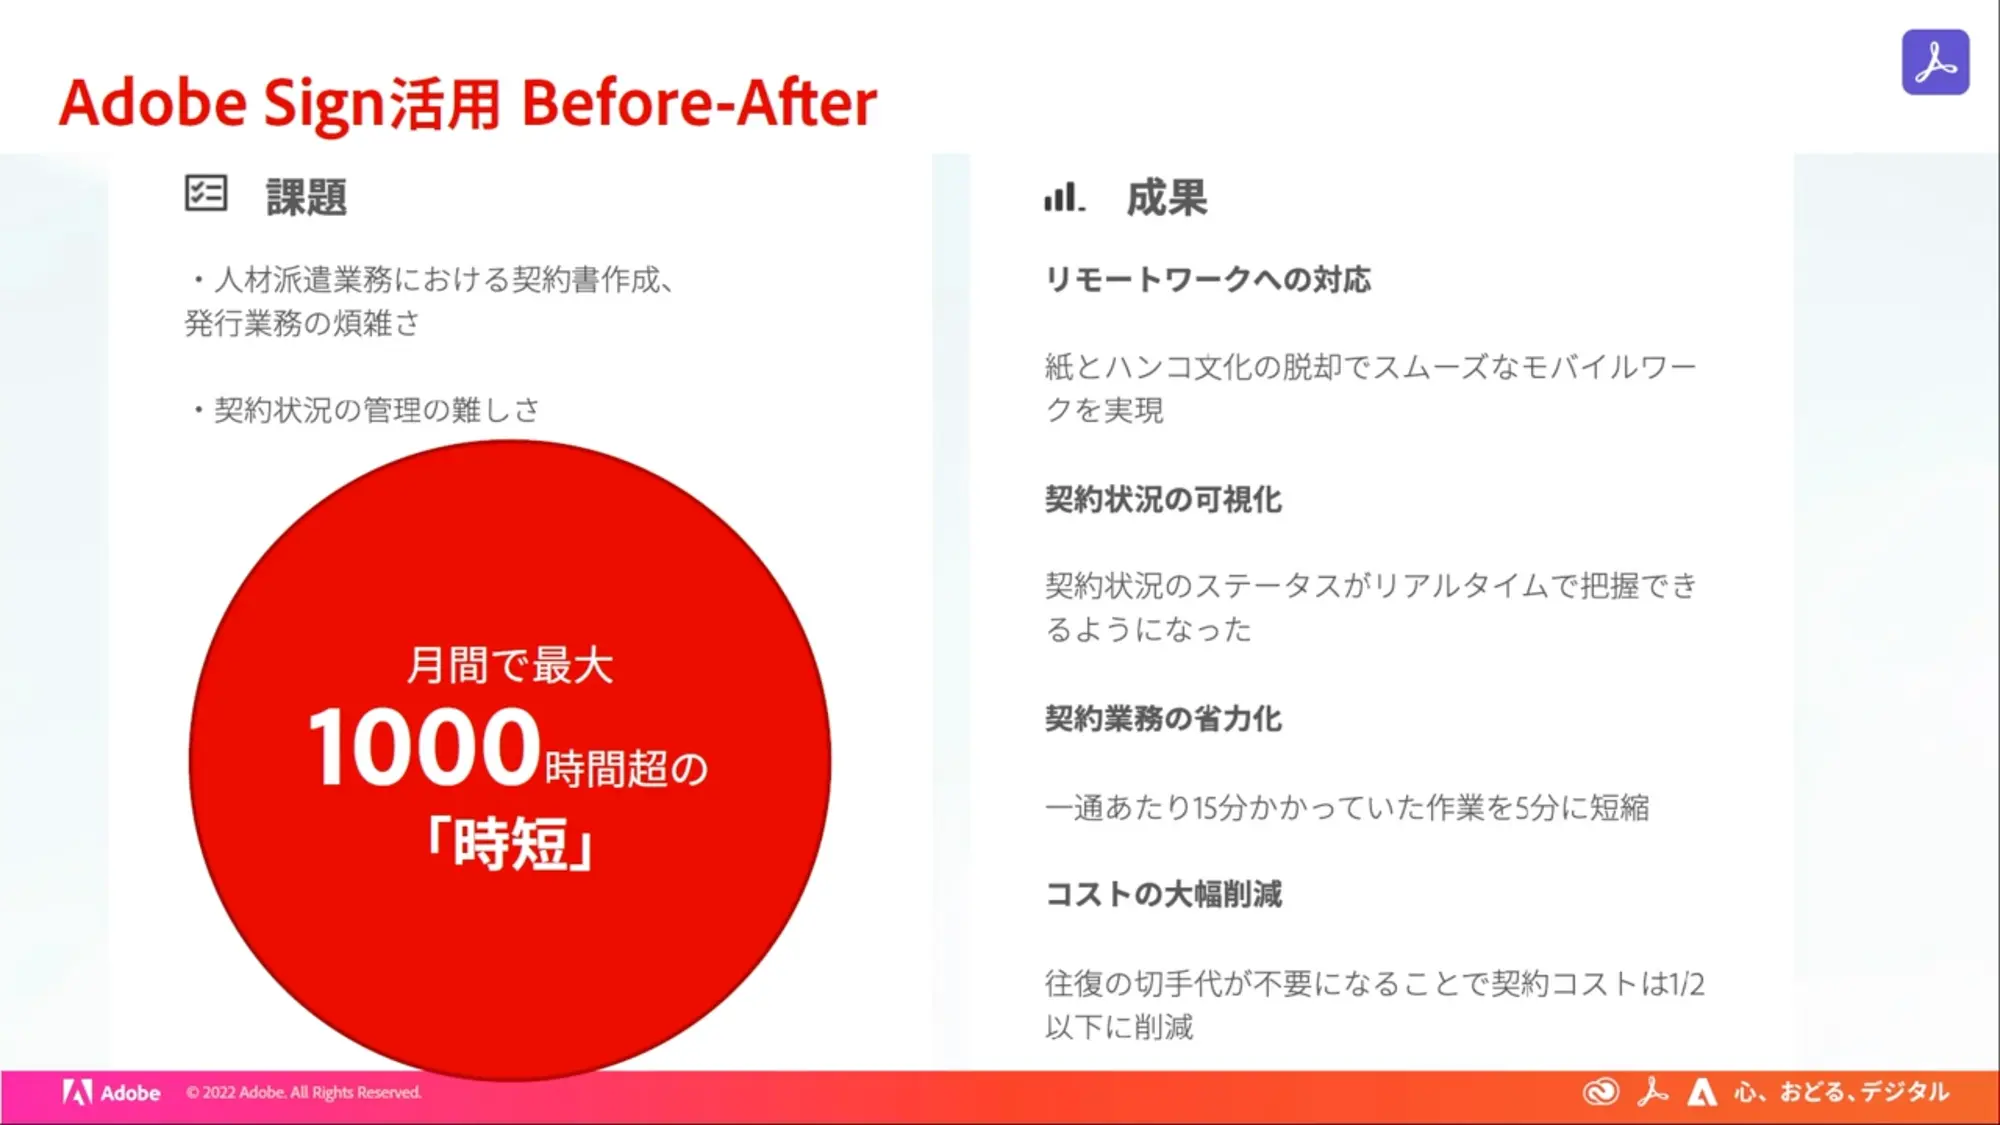 Adobe Sign活用 Before-After